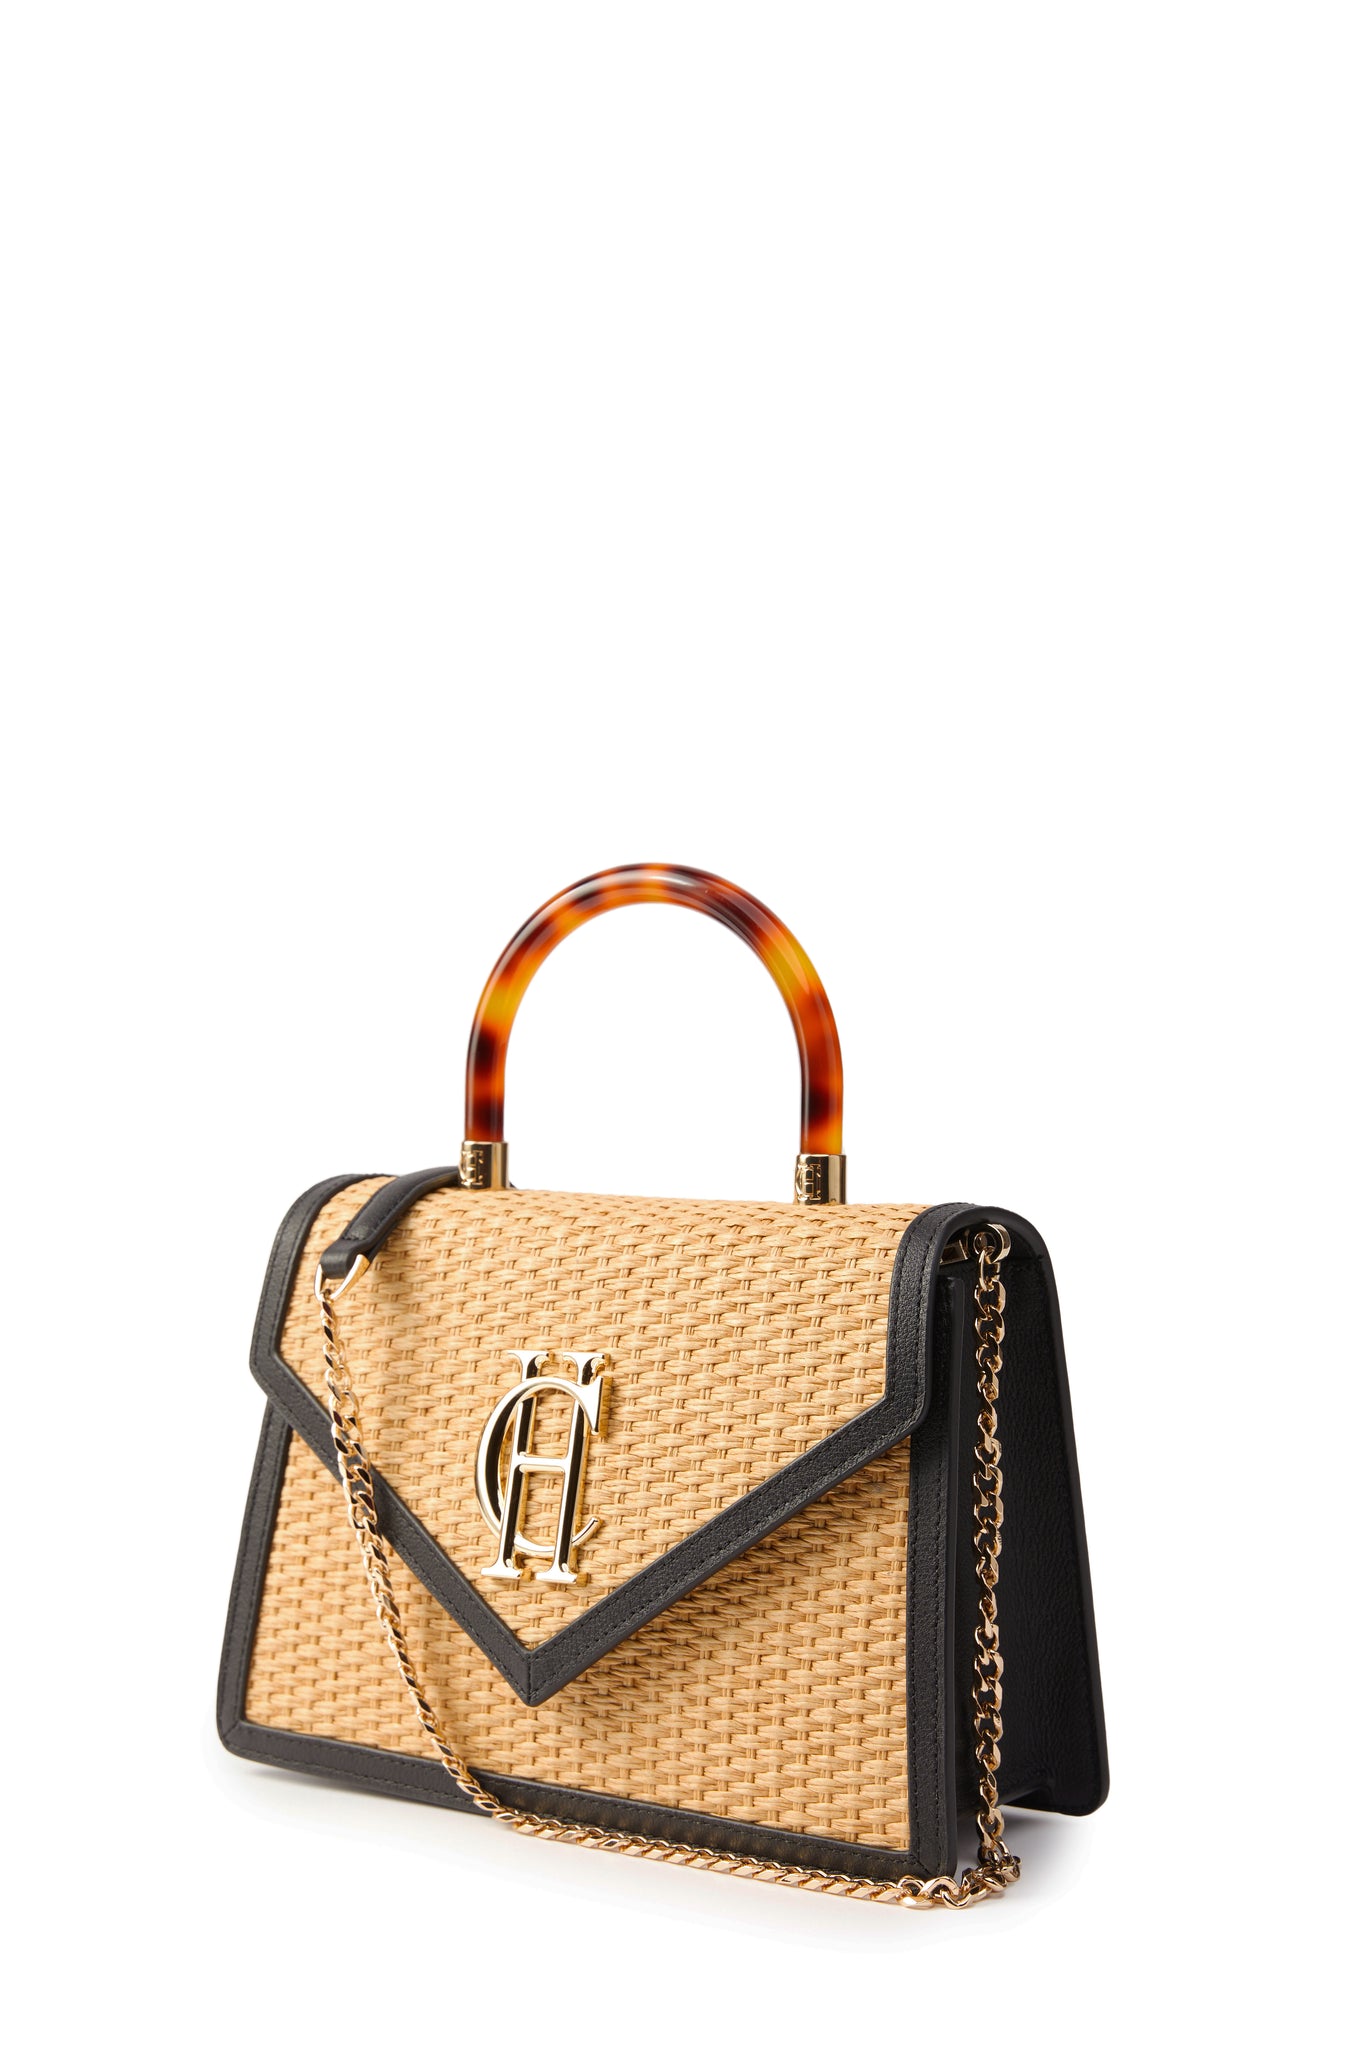 side image of natural raffia bag with acetate tortoiseshell effect top handle and gold chain